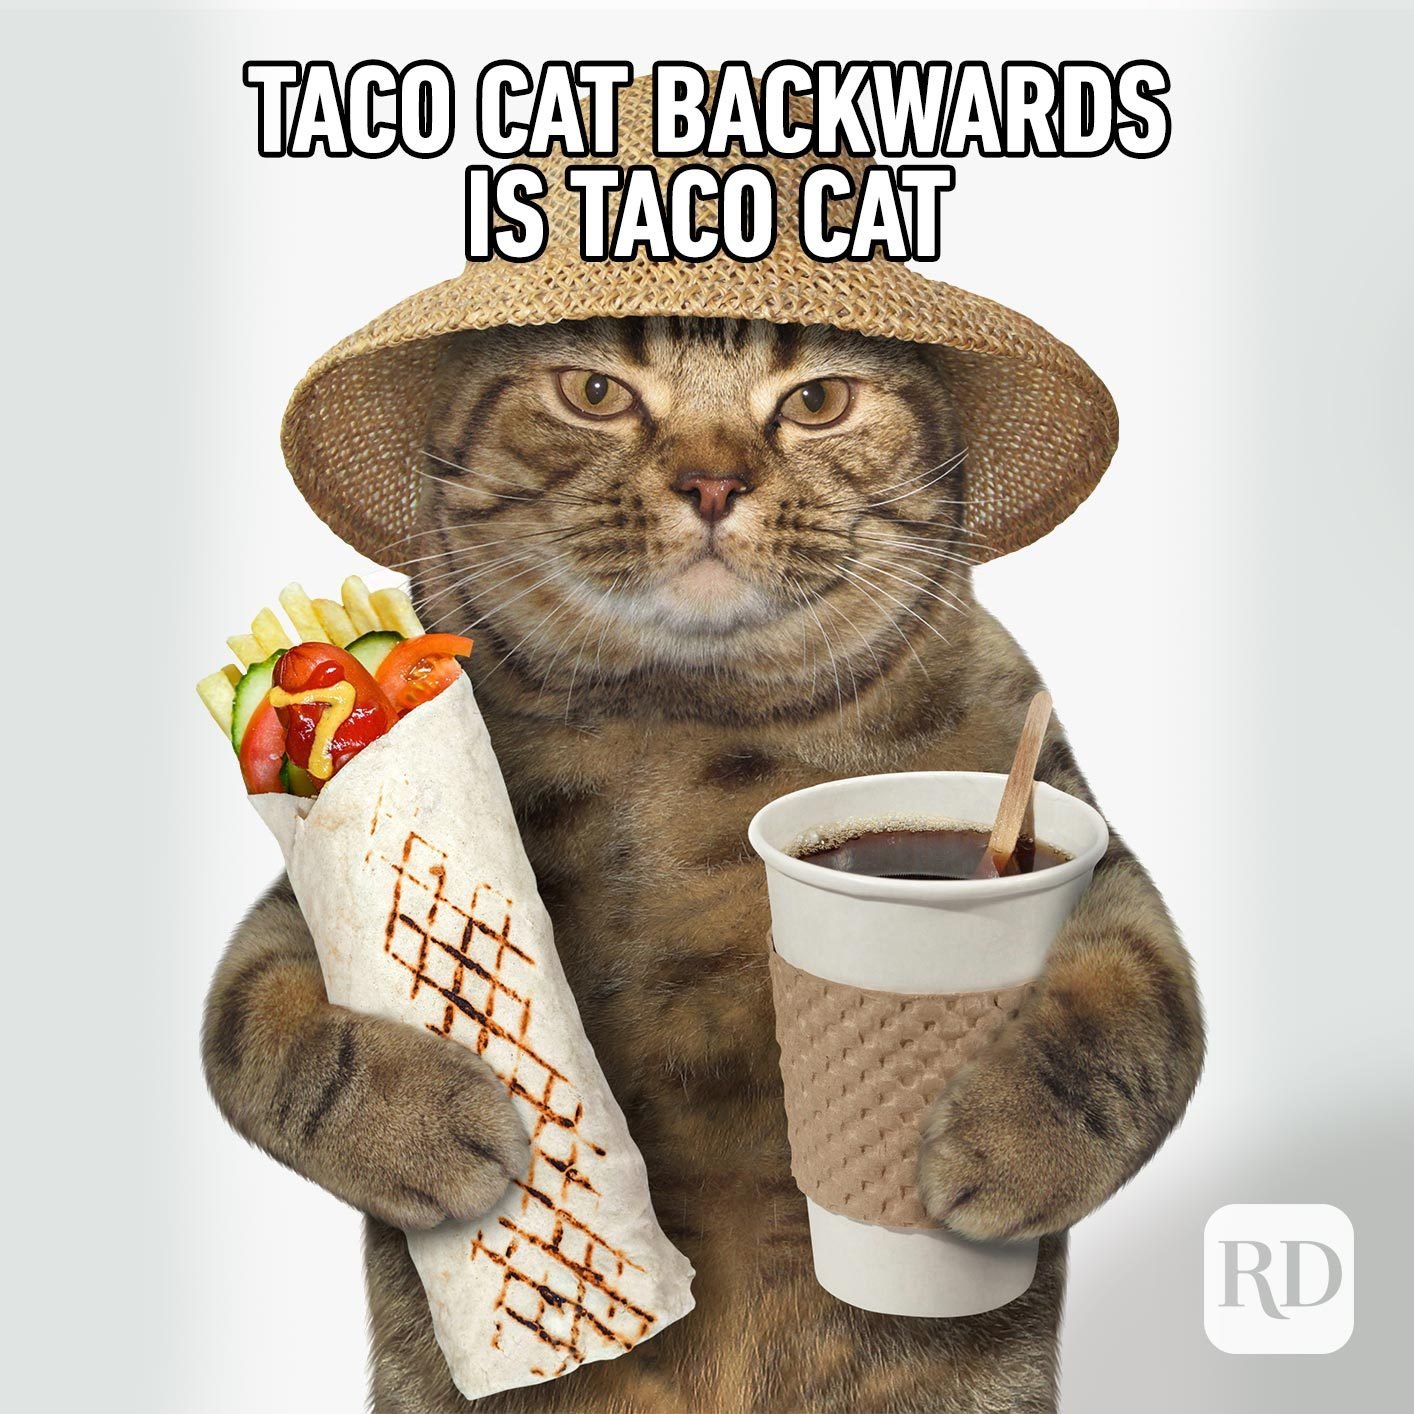 Image of cat holding a taco and a coffee. Meme text: Taco cat backwards is taco cat.